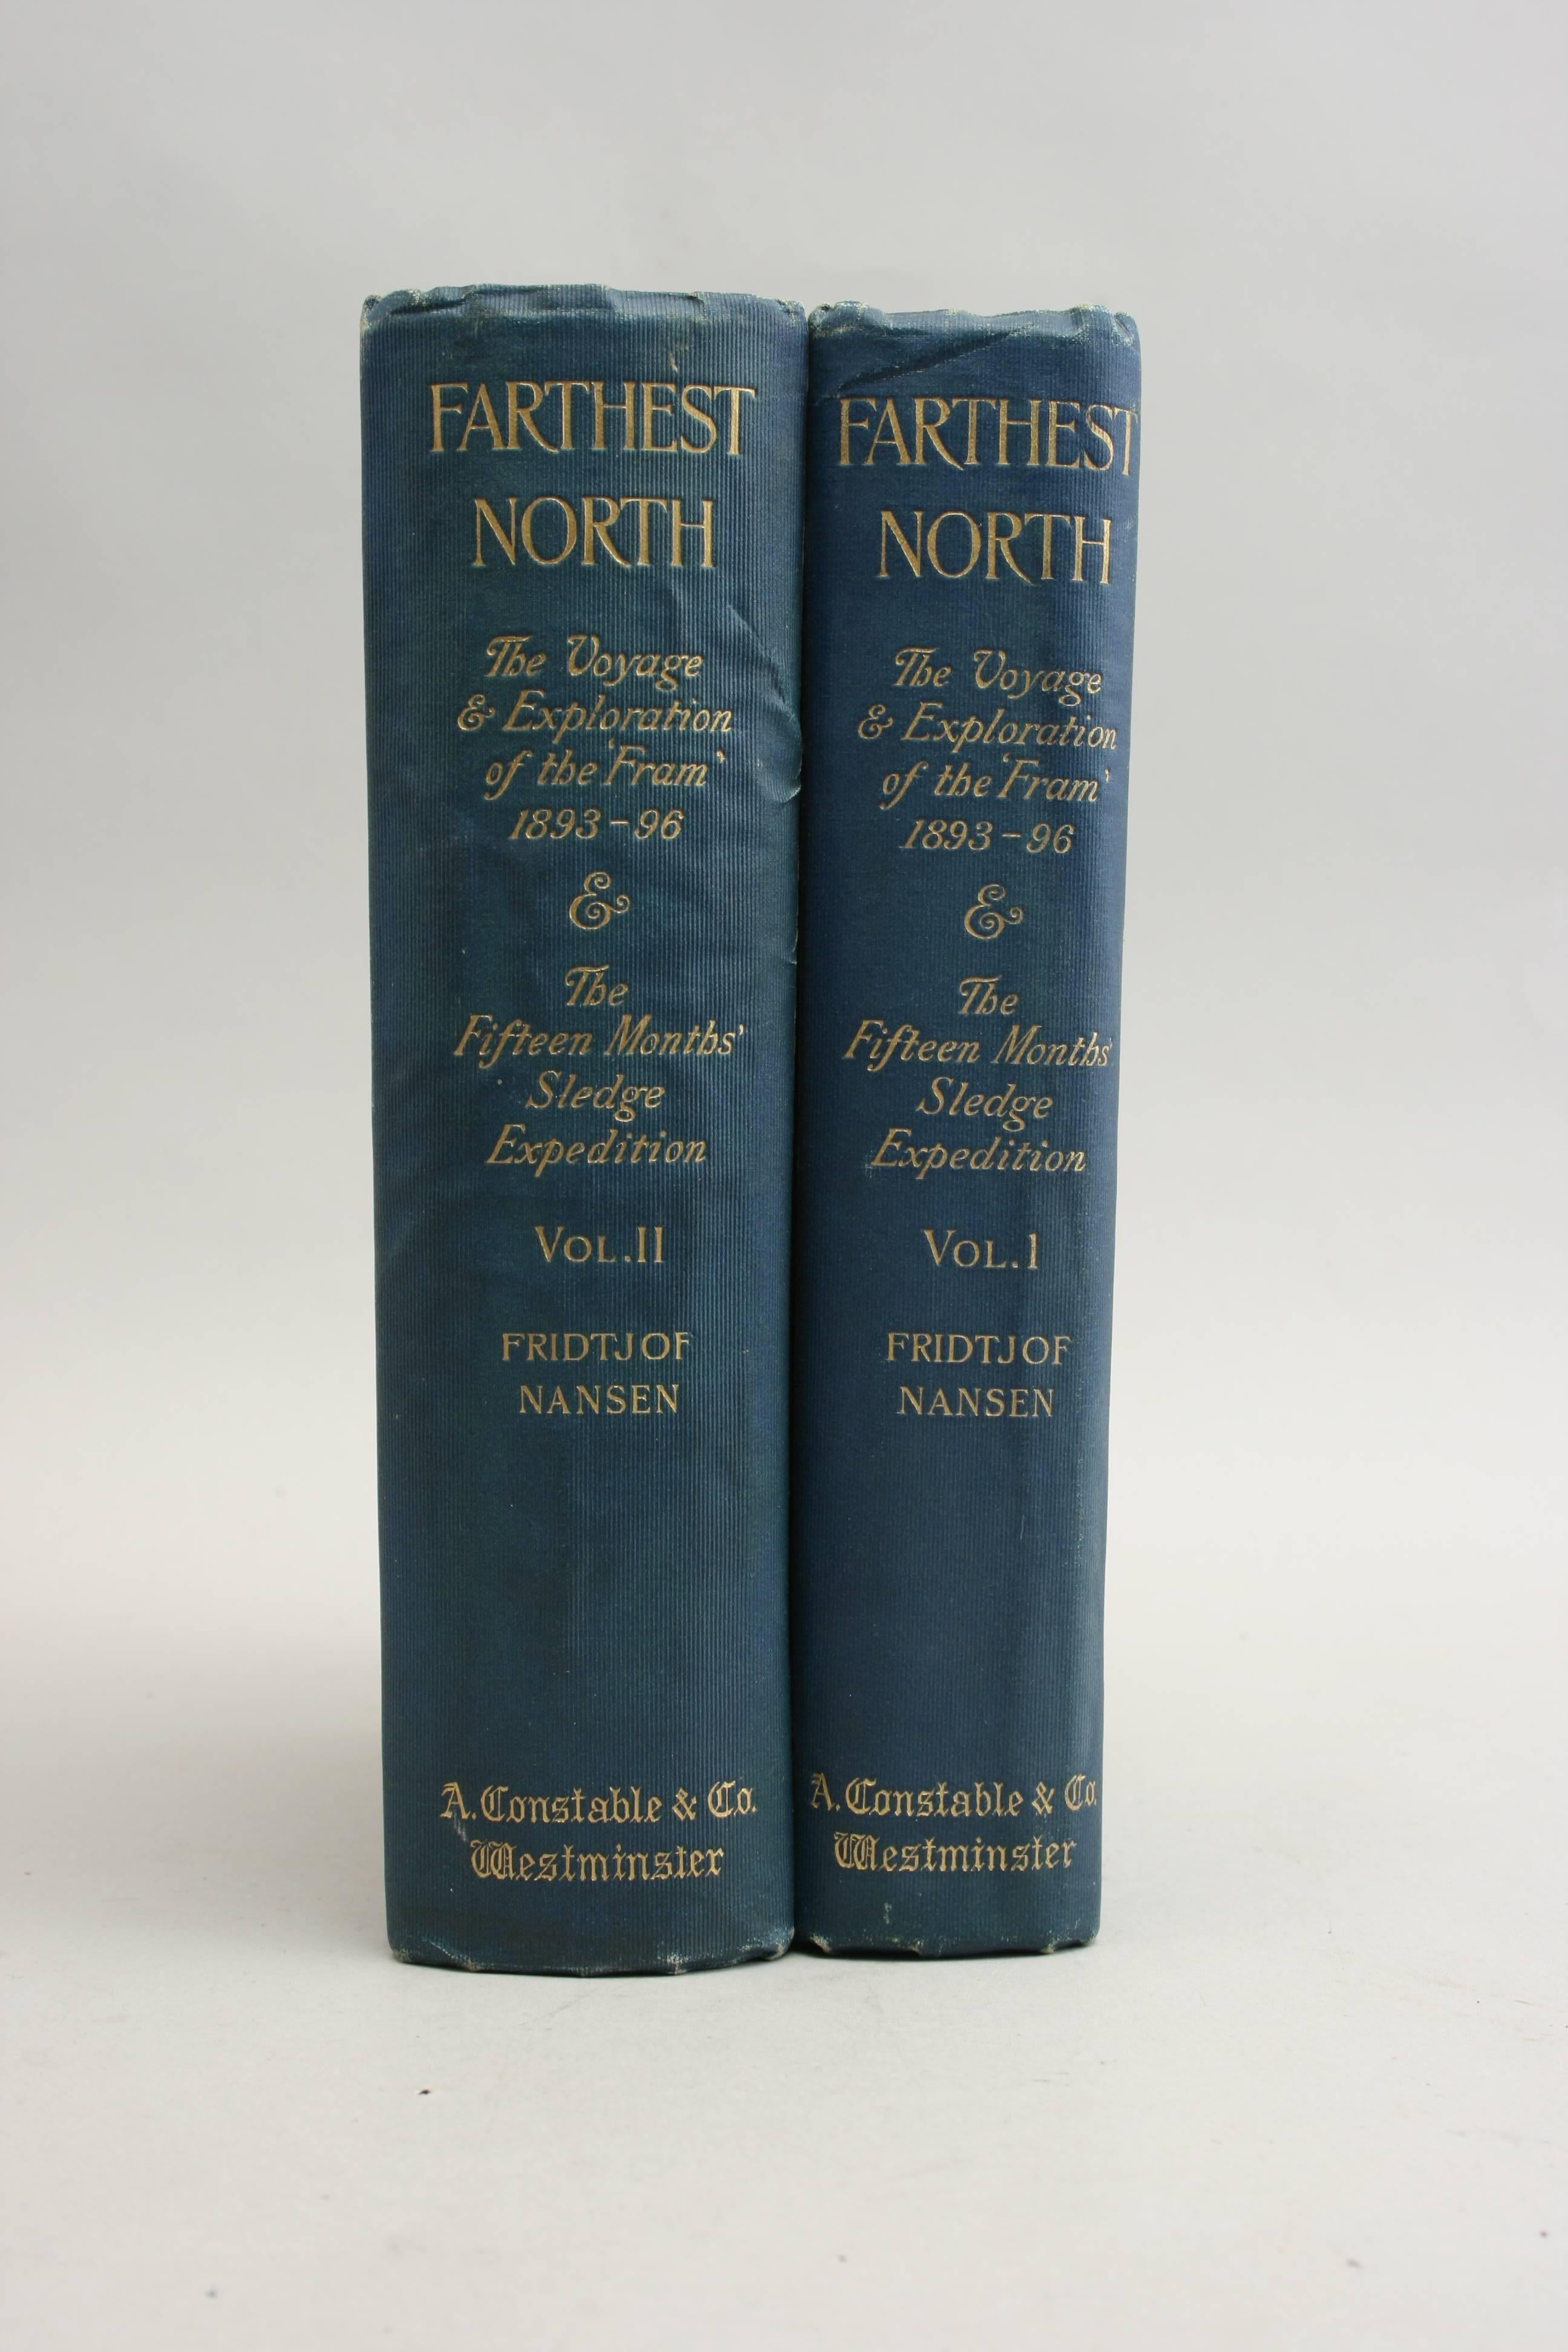 'Farthest North' - The Voyage & Exploration of the 'Fram' 1893-1896 & The Fifteen Months Sleigh Journey by Fridtjof Nansen.

Two volumes of one of the greatest journeys of exploration ever undertaken by Fridtjof Nansen in 1893. The books tell the